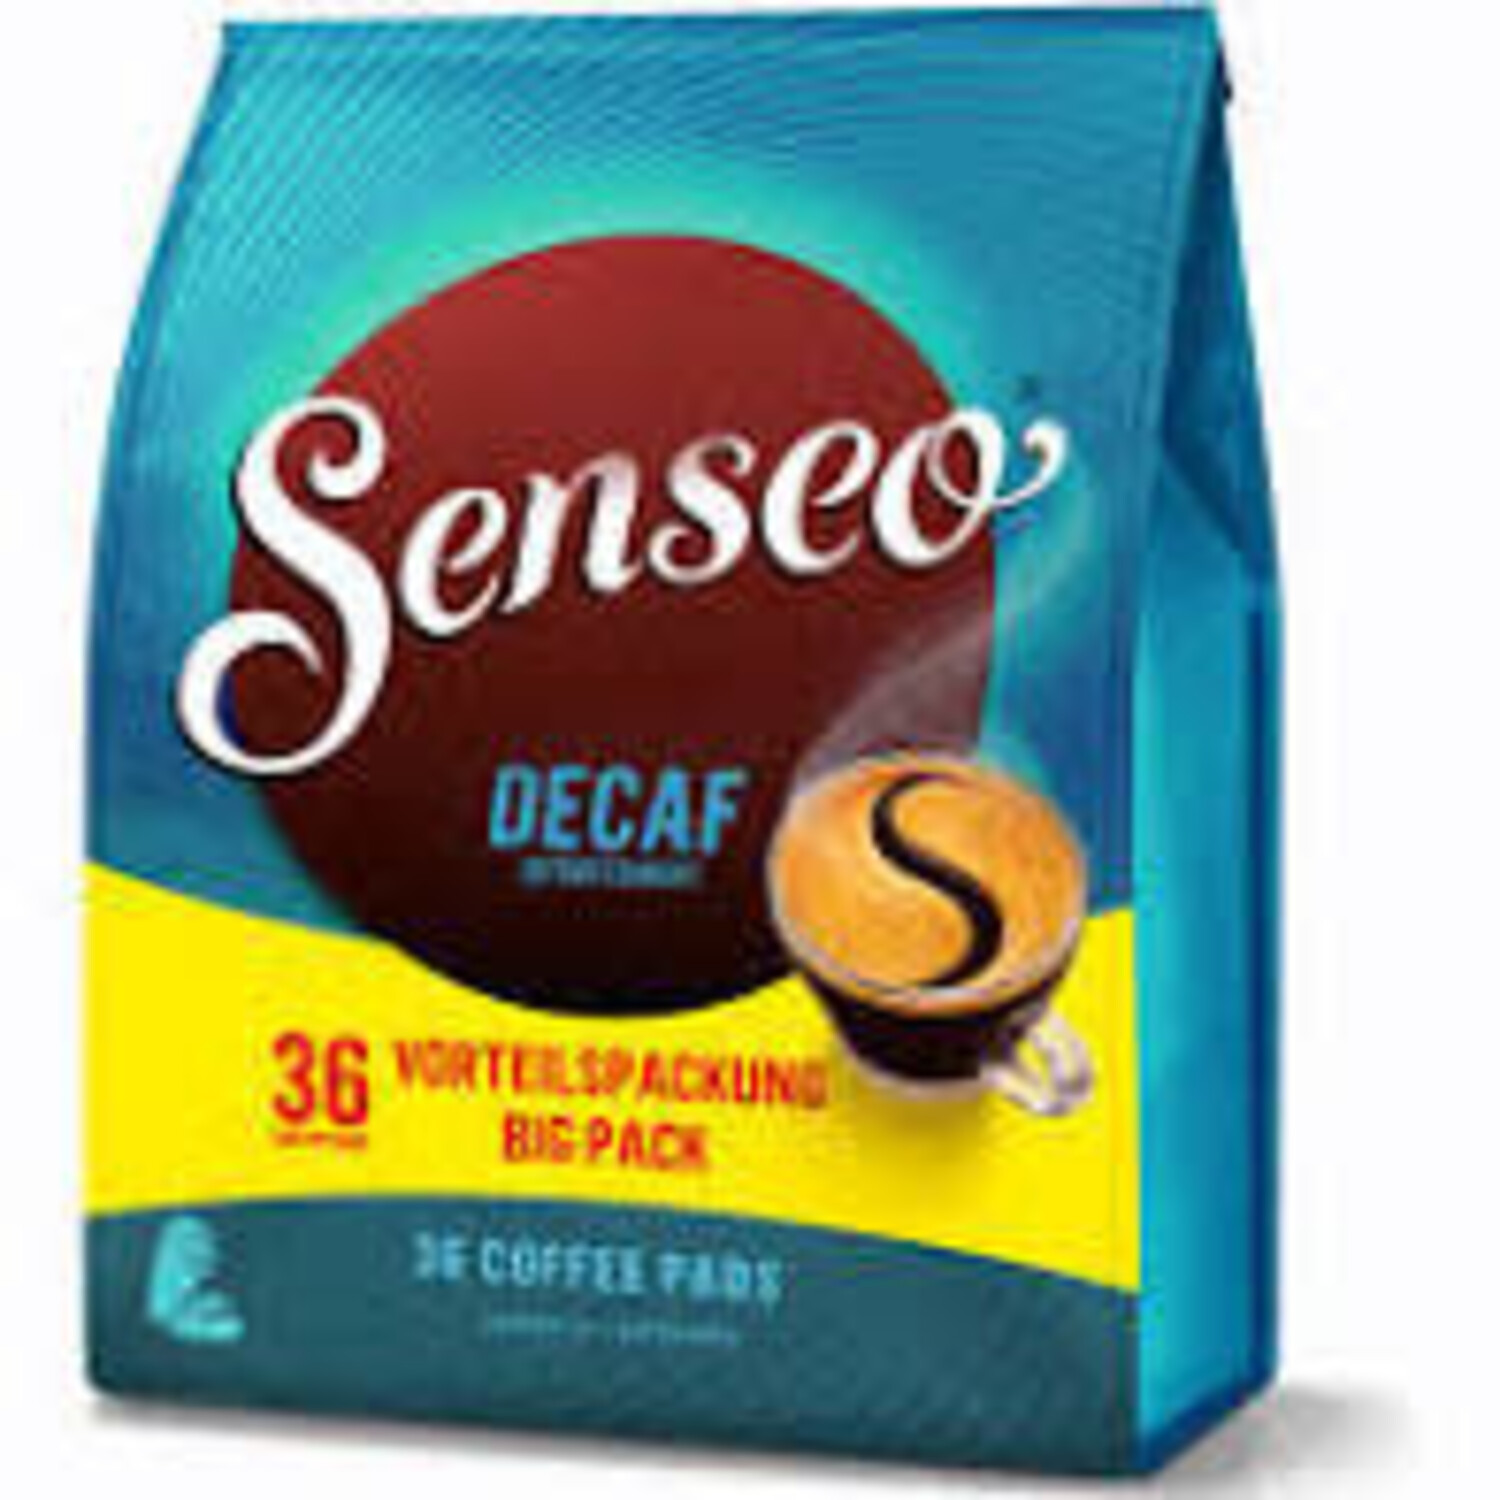 Senseo DeCaf Coffee Pods 36 Count - Peters Gourmet Market